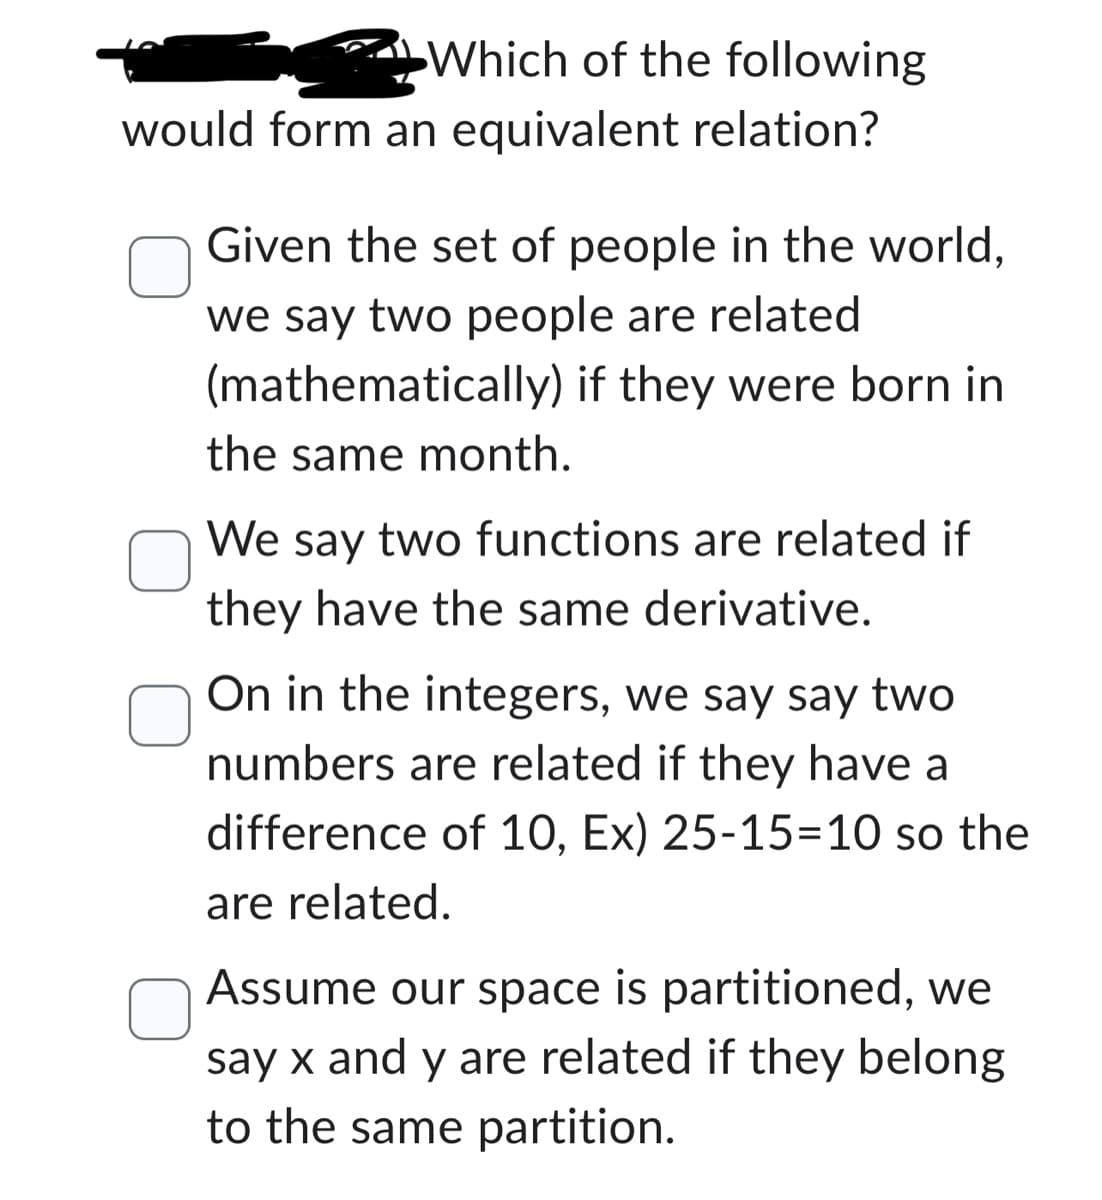 Which of the following
would form an equivalent relation?
Given the set of people in the world,
we say two people are related
(mathematically) if they were born in
the same month.
We say two functions are related if
they have the same derivative.
On in the integers, we say say two
numbers are related if they have a
difference of 10, Ex) 25-15-10 so the
are related.
Assume our space is partitioned, we
say x and y are related if they belong
to the same partition.